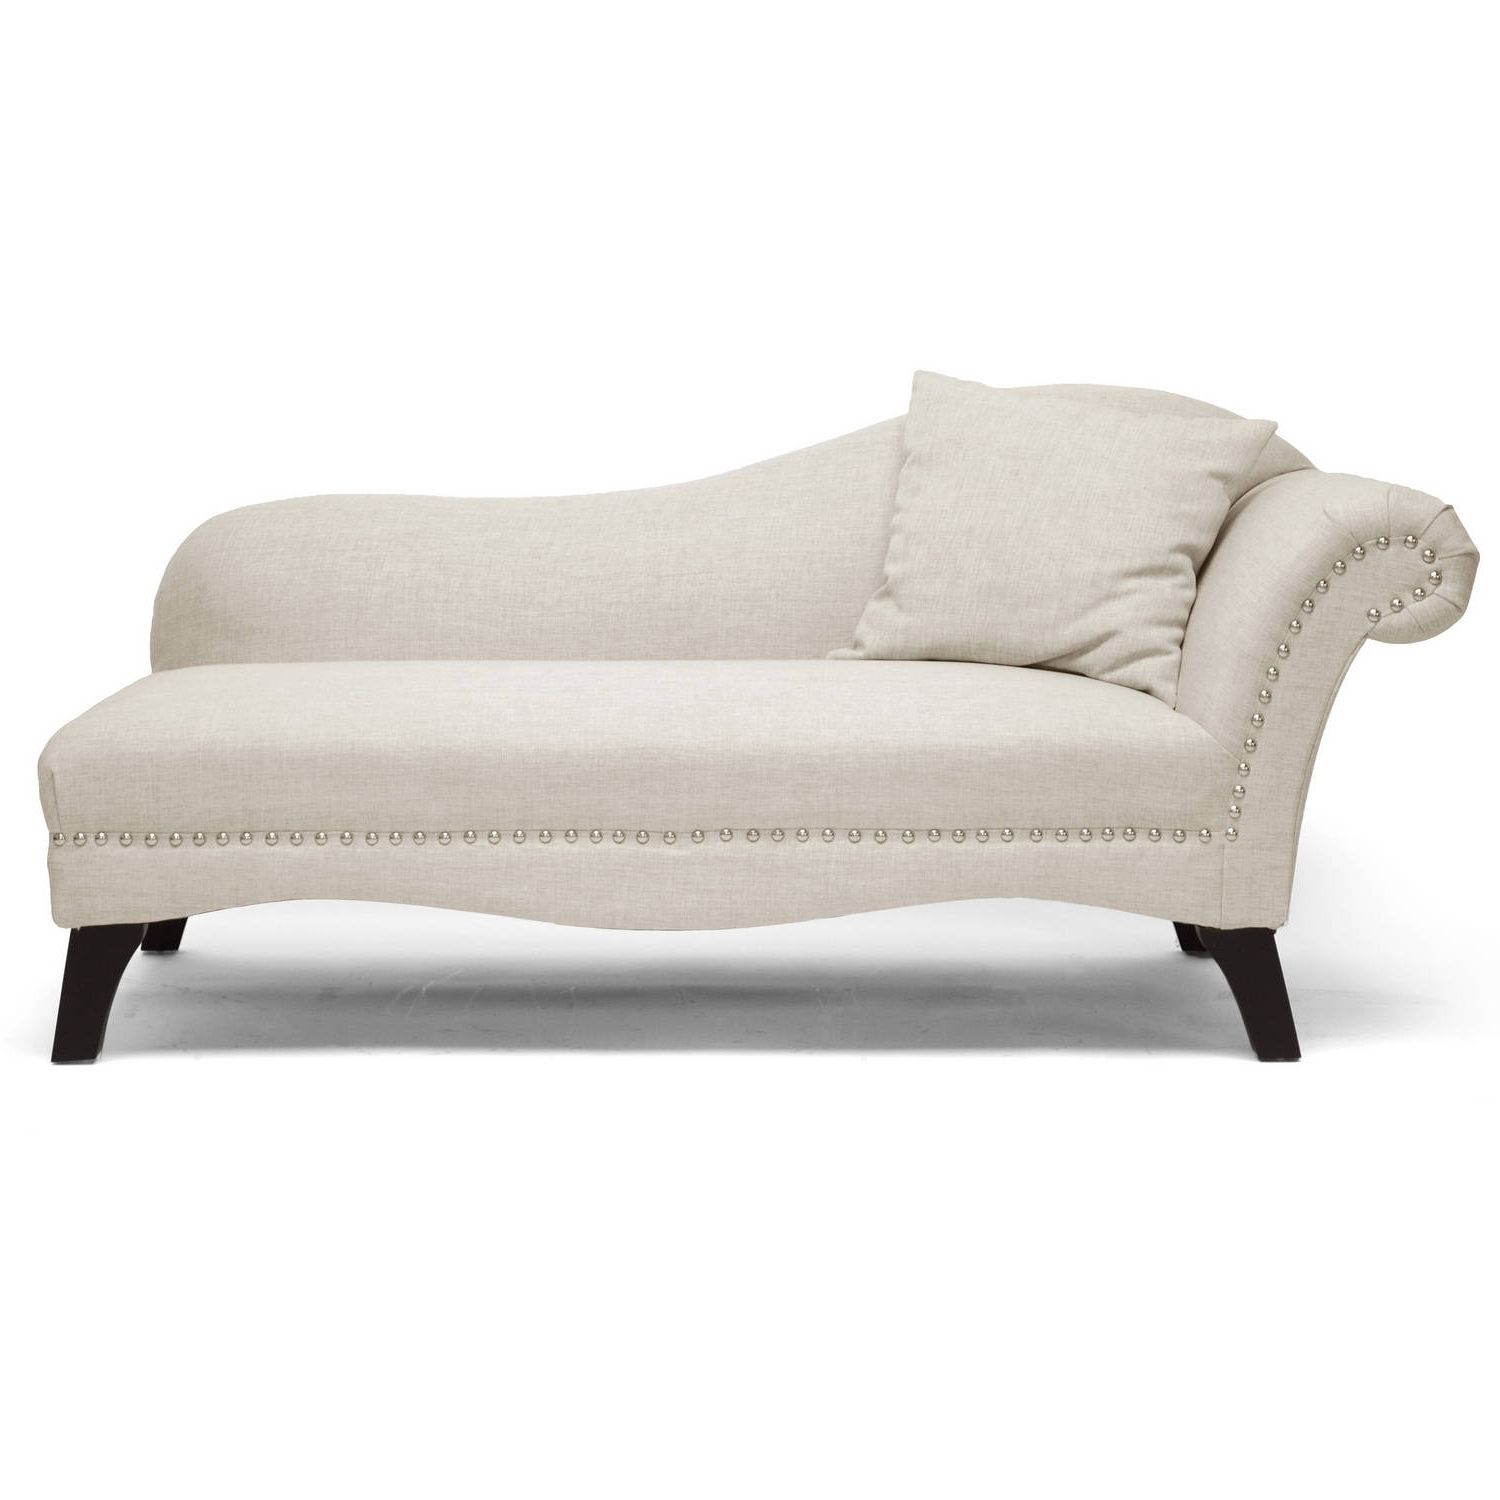 Best And Newest Chaise Lounges – Walmart With Chaise Lounge Chairs Under $ (View 2 of 15)